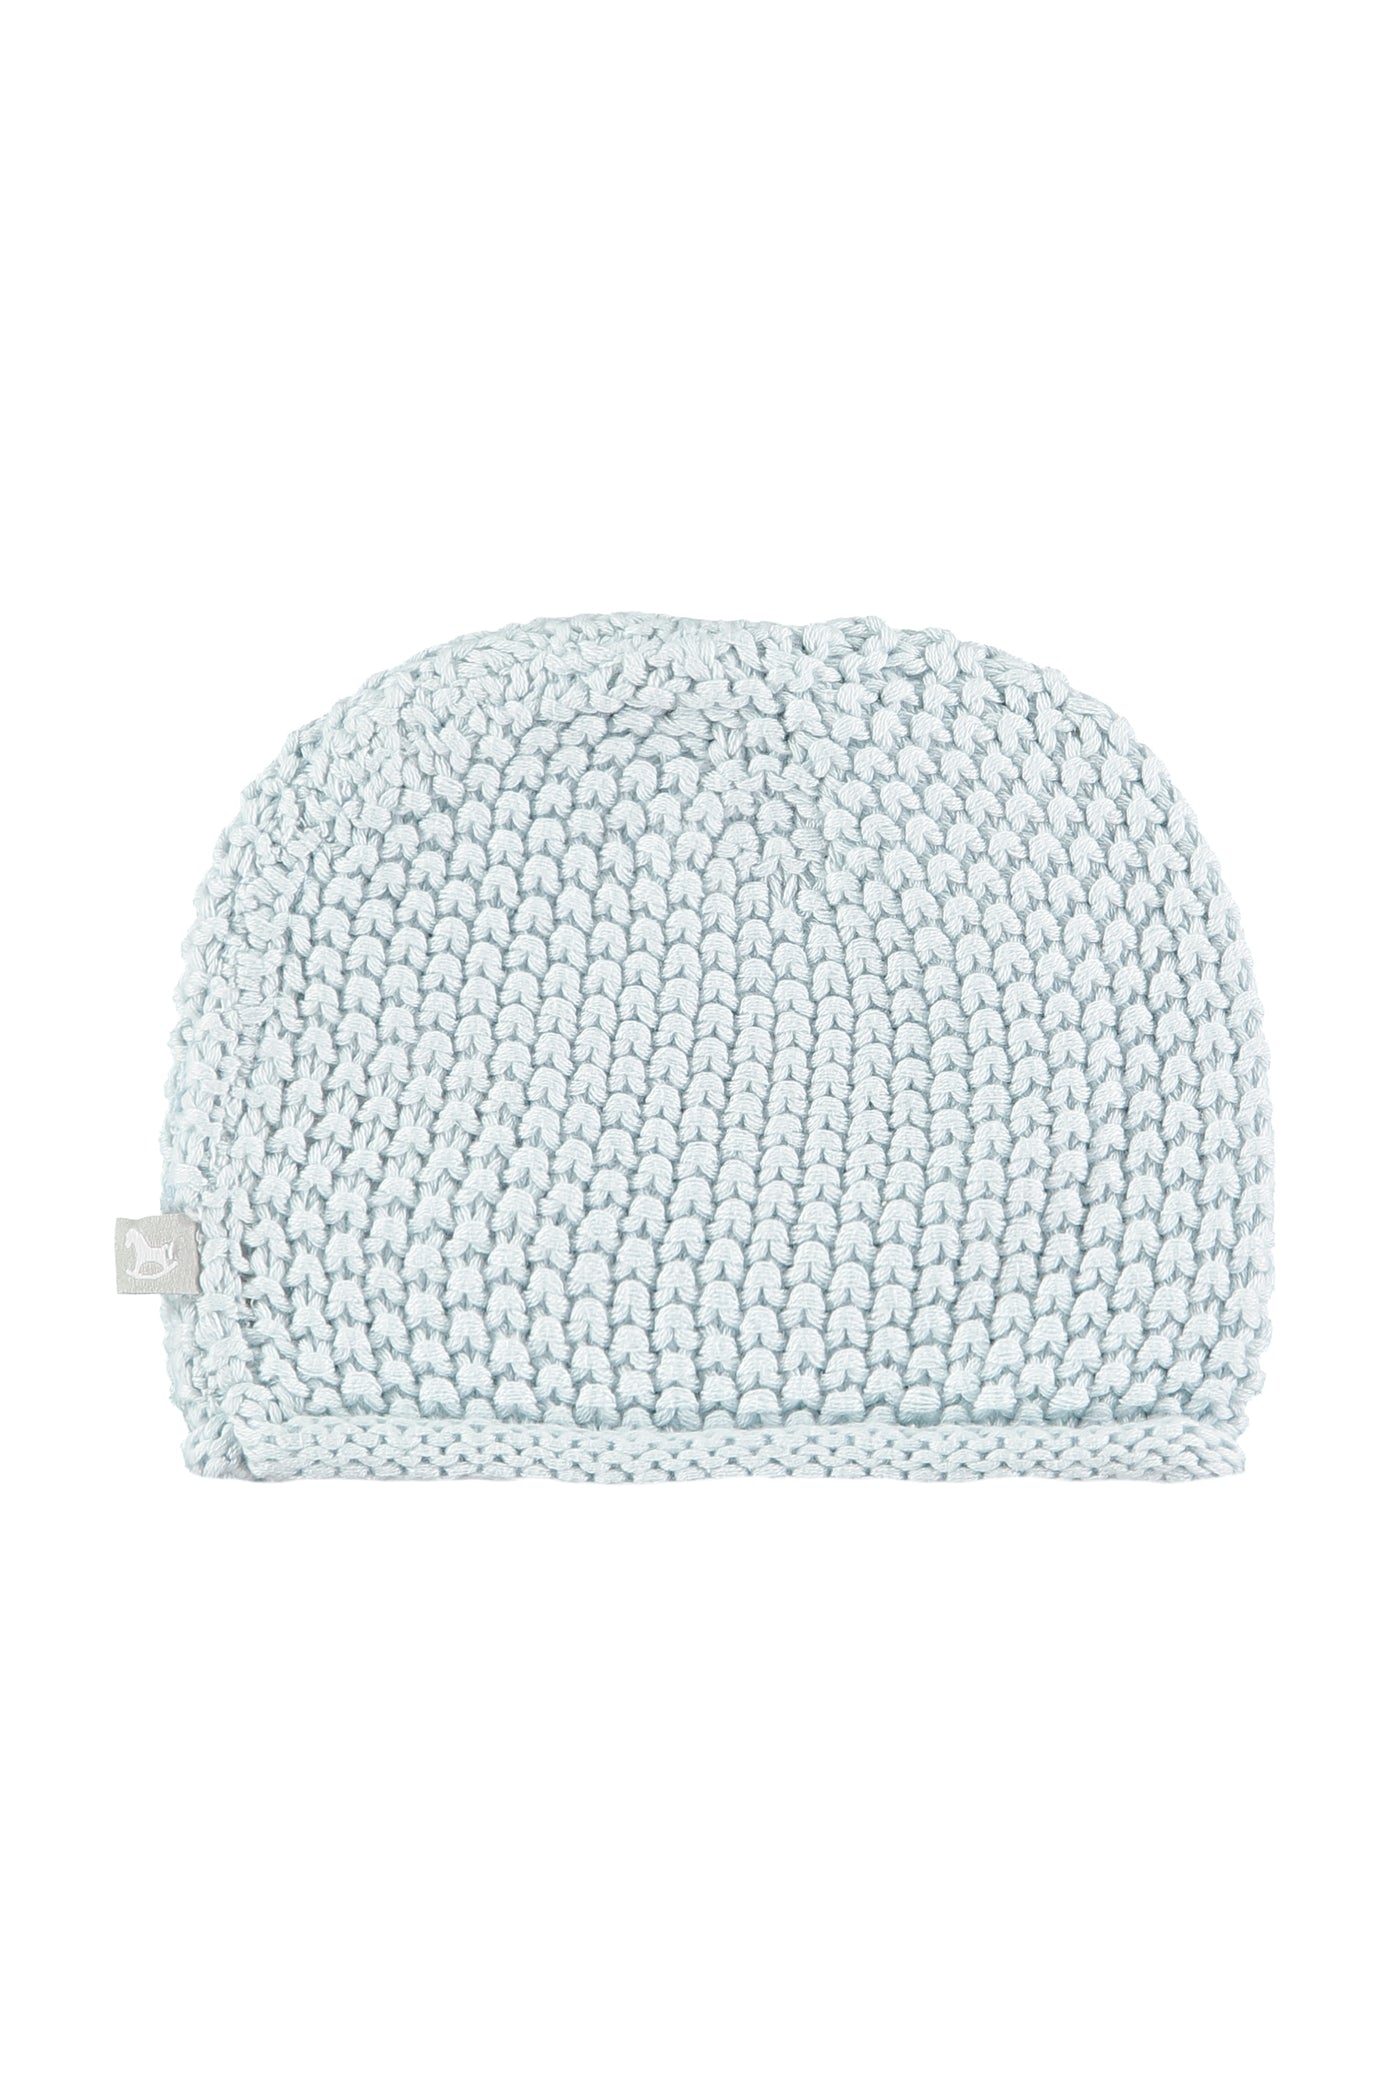 Cotton Knitted Hat, blue